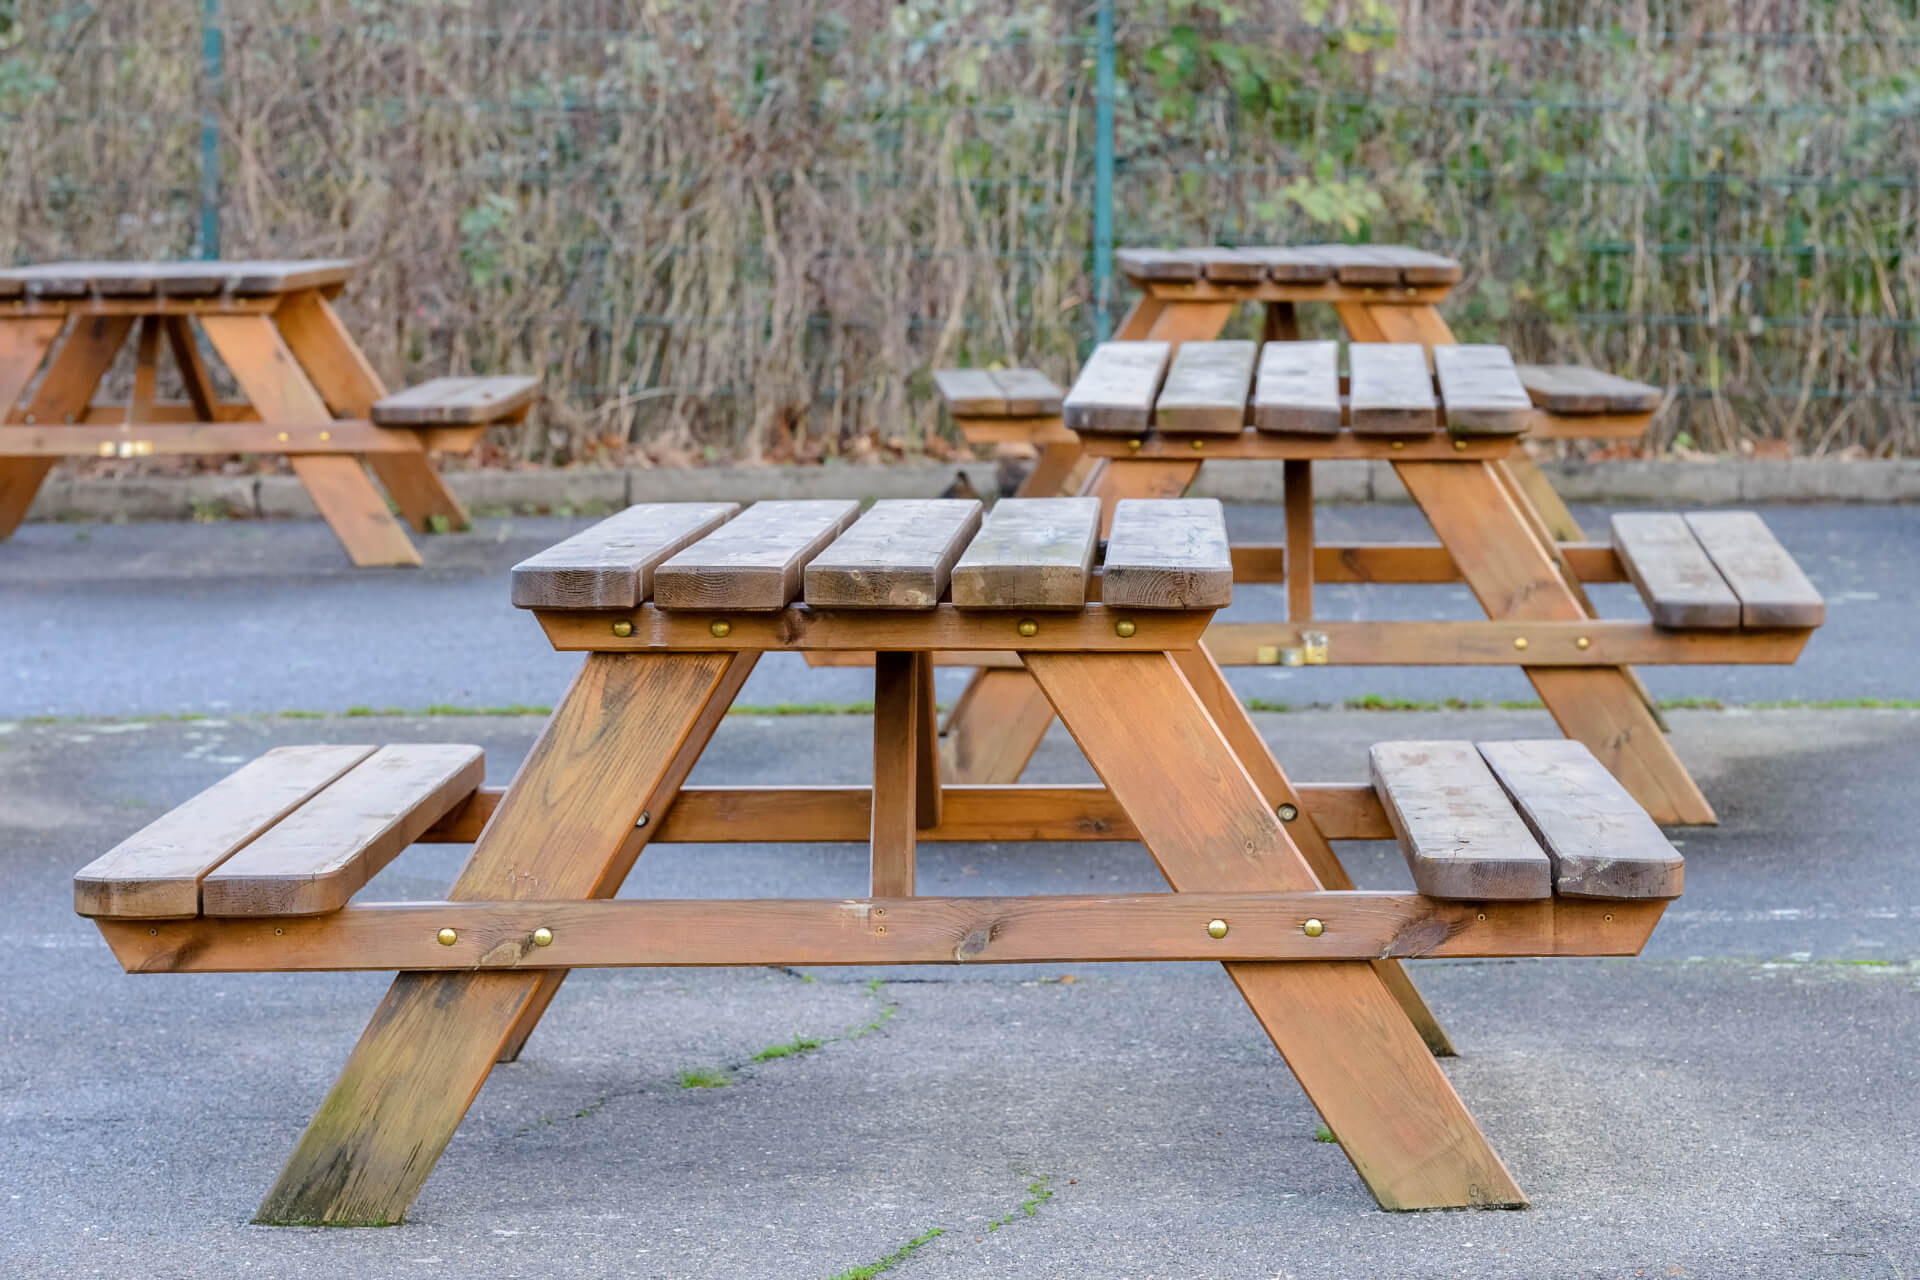 Benches, Chairs & Picnic Tables